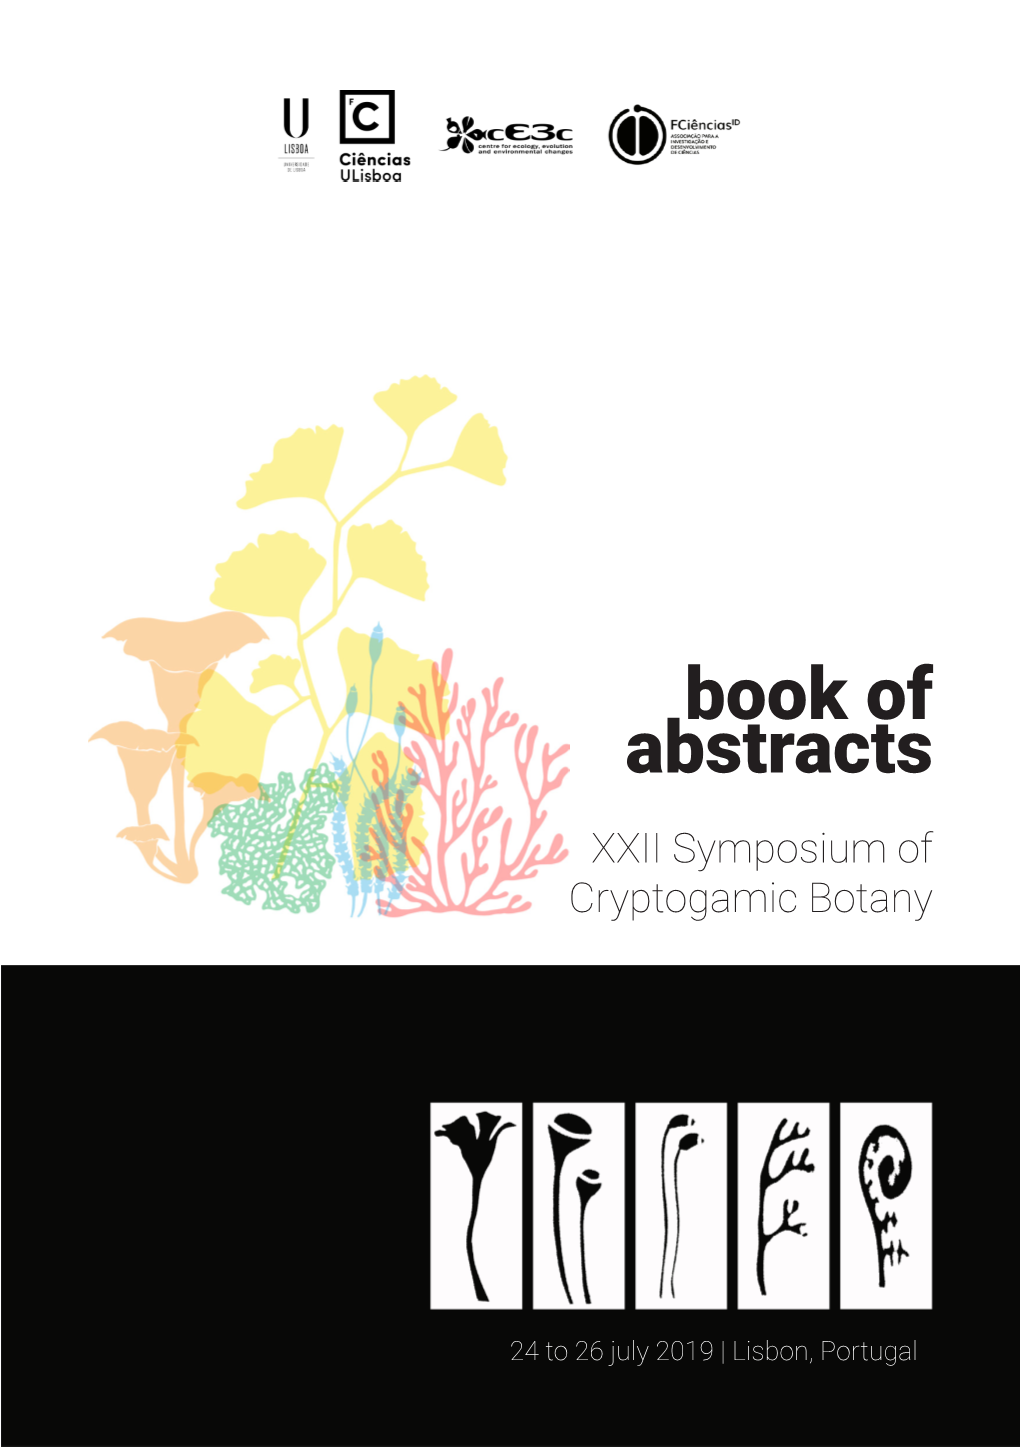 Book of Abstracts XXII Symposium of Cryptogamic Botany